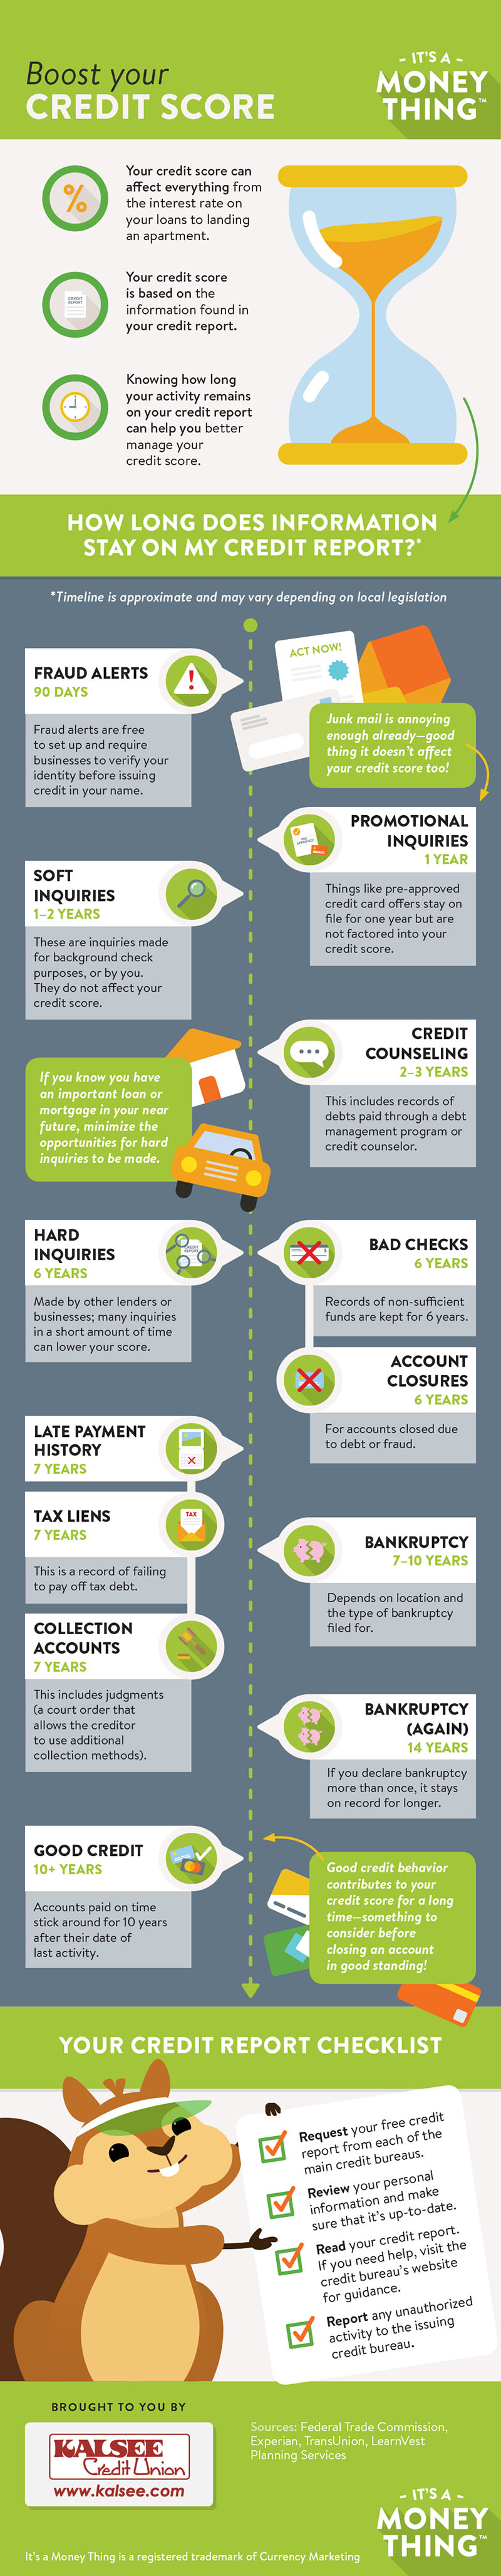 boost your credit score infographic, click for transcription